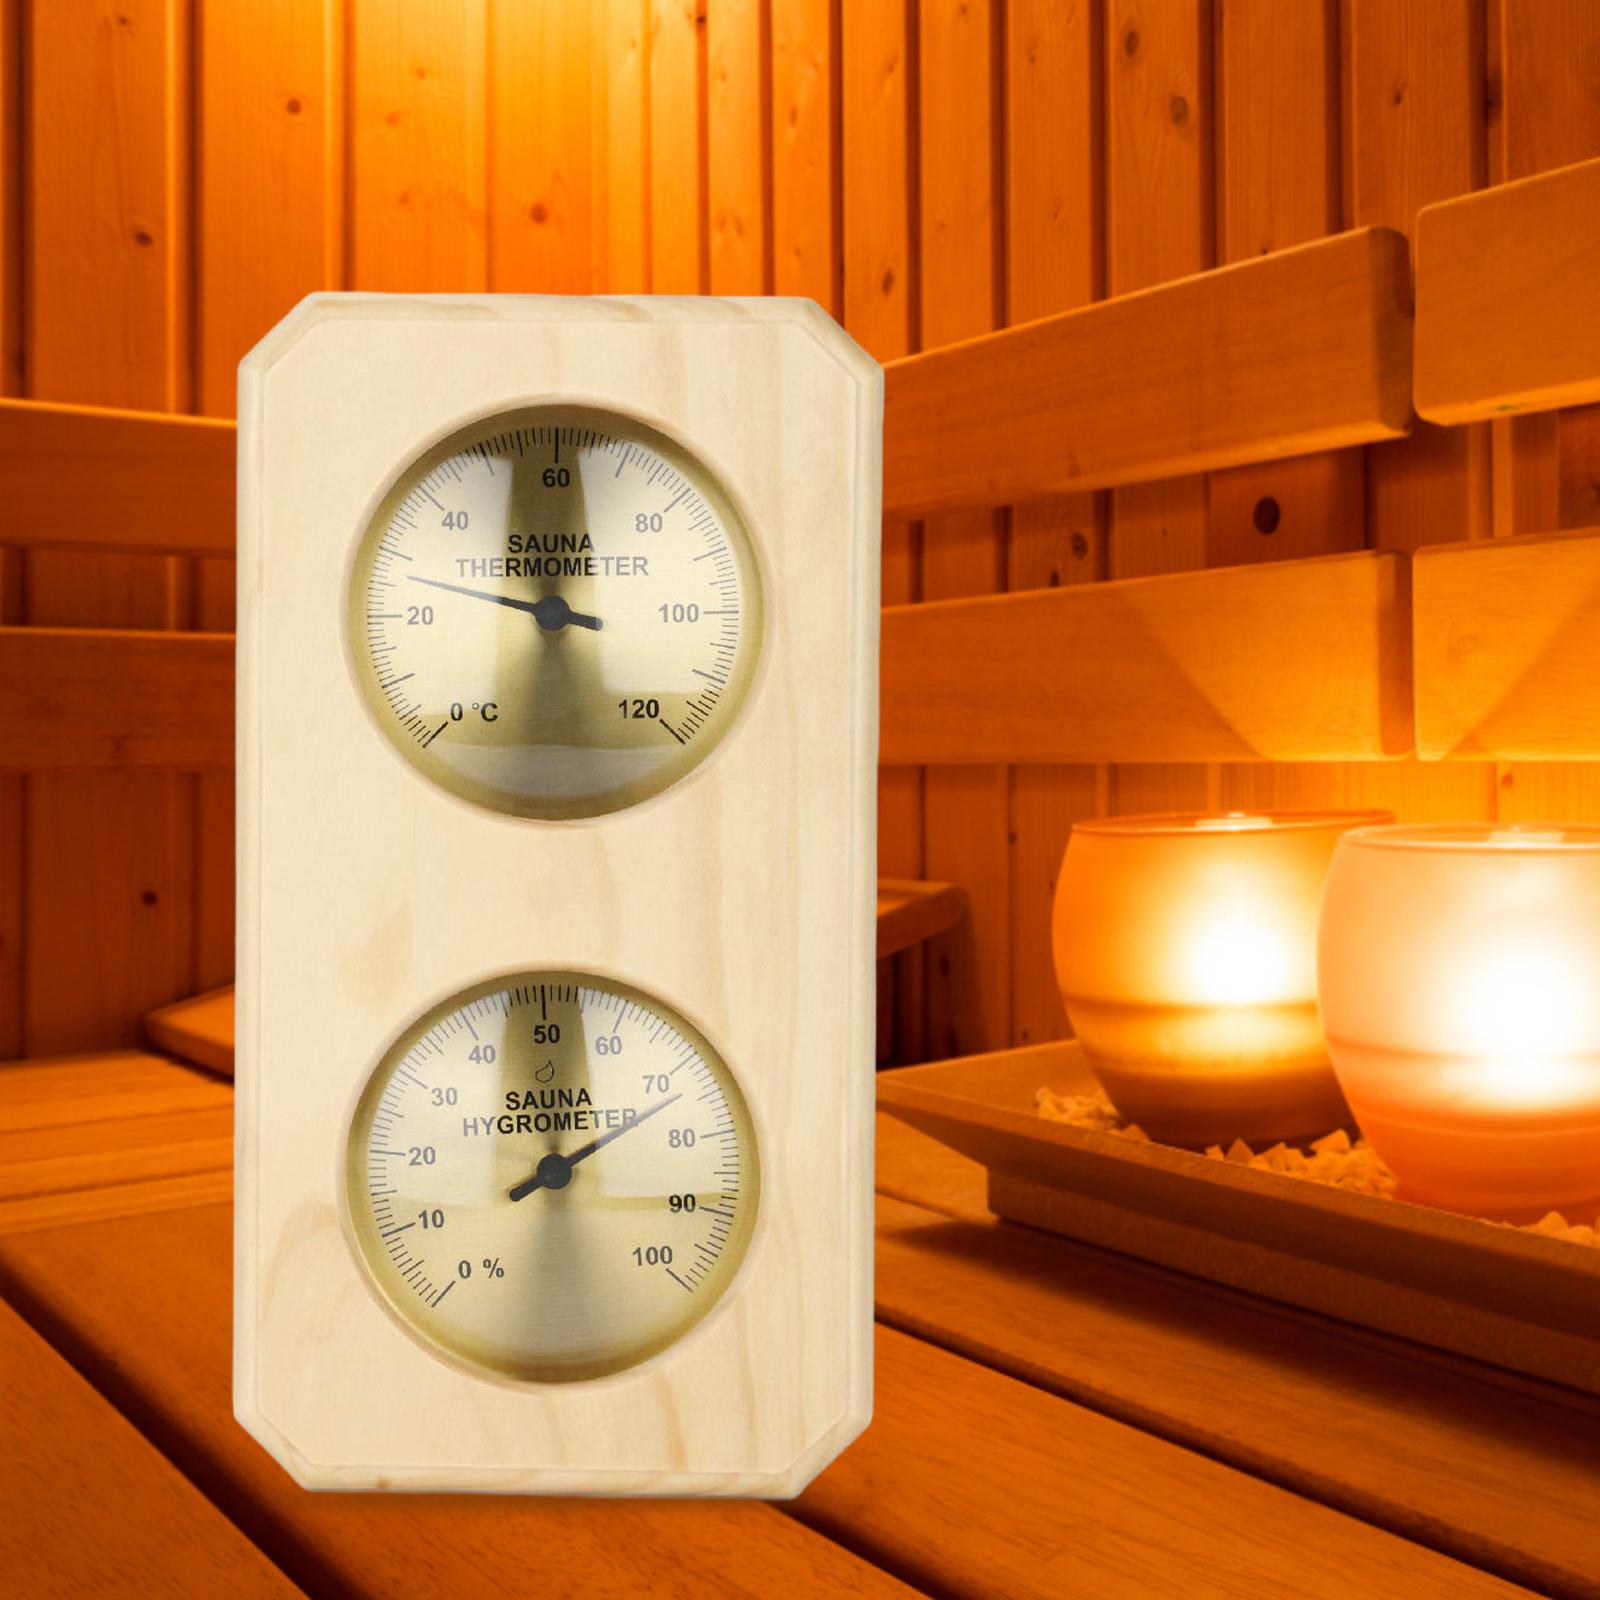 2 in1 Sauna Thermometer Hygrometer Digital Wall Mounted for Sauna Room Indoor Humidity Hotel